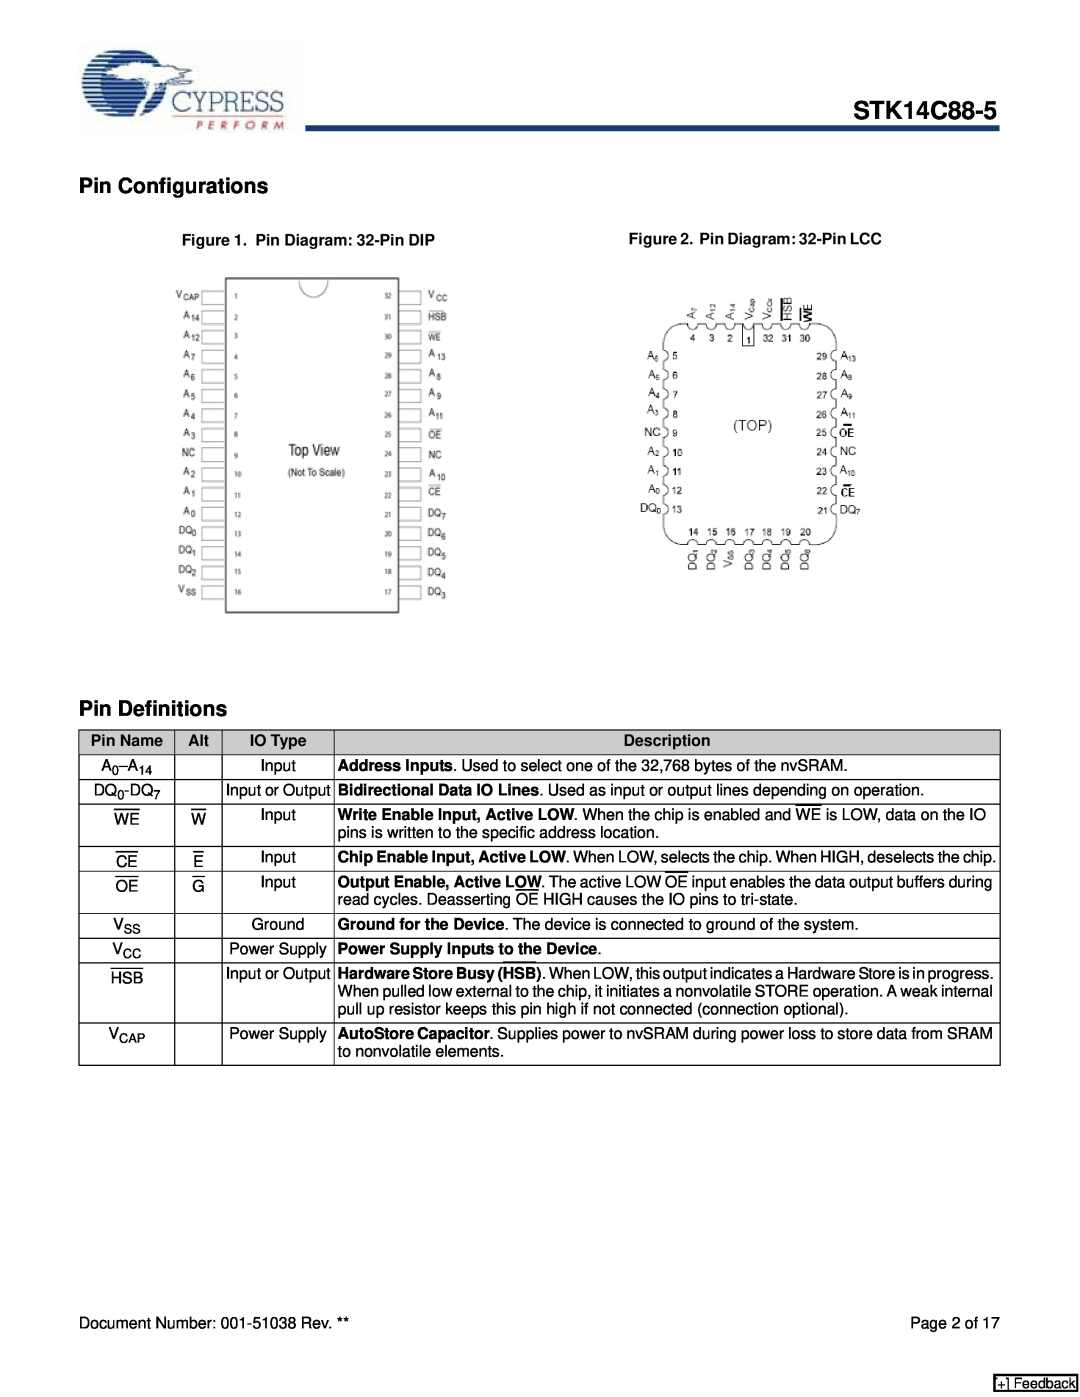 Cypress STK14C88-5 manual Pin Configurations, Pin Definitions 